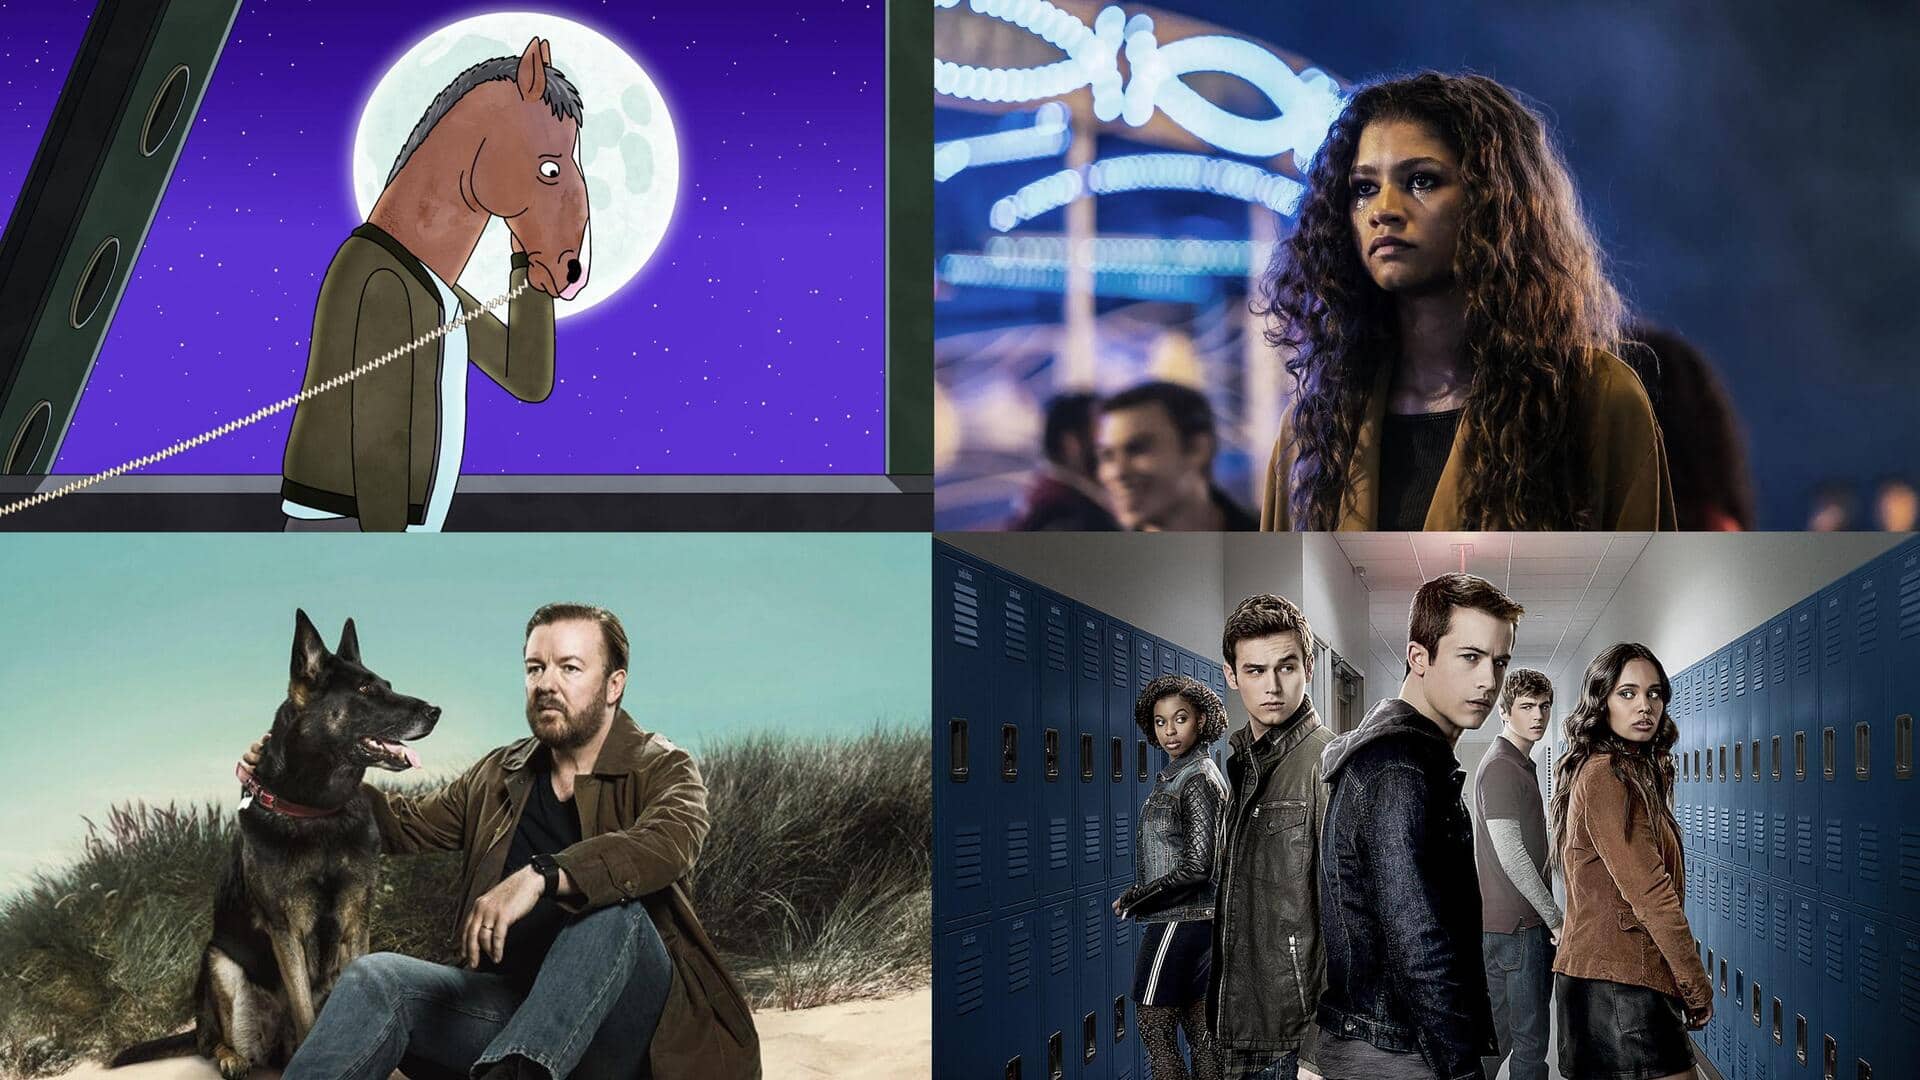 Must-watch shows that talk about mental health issues